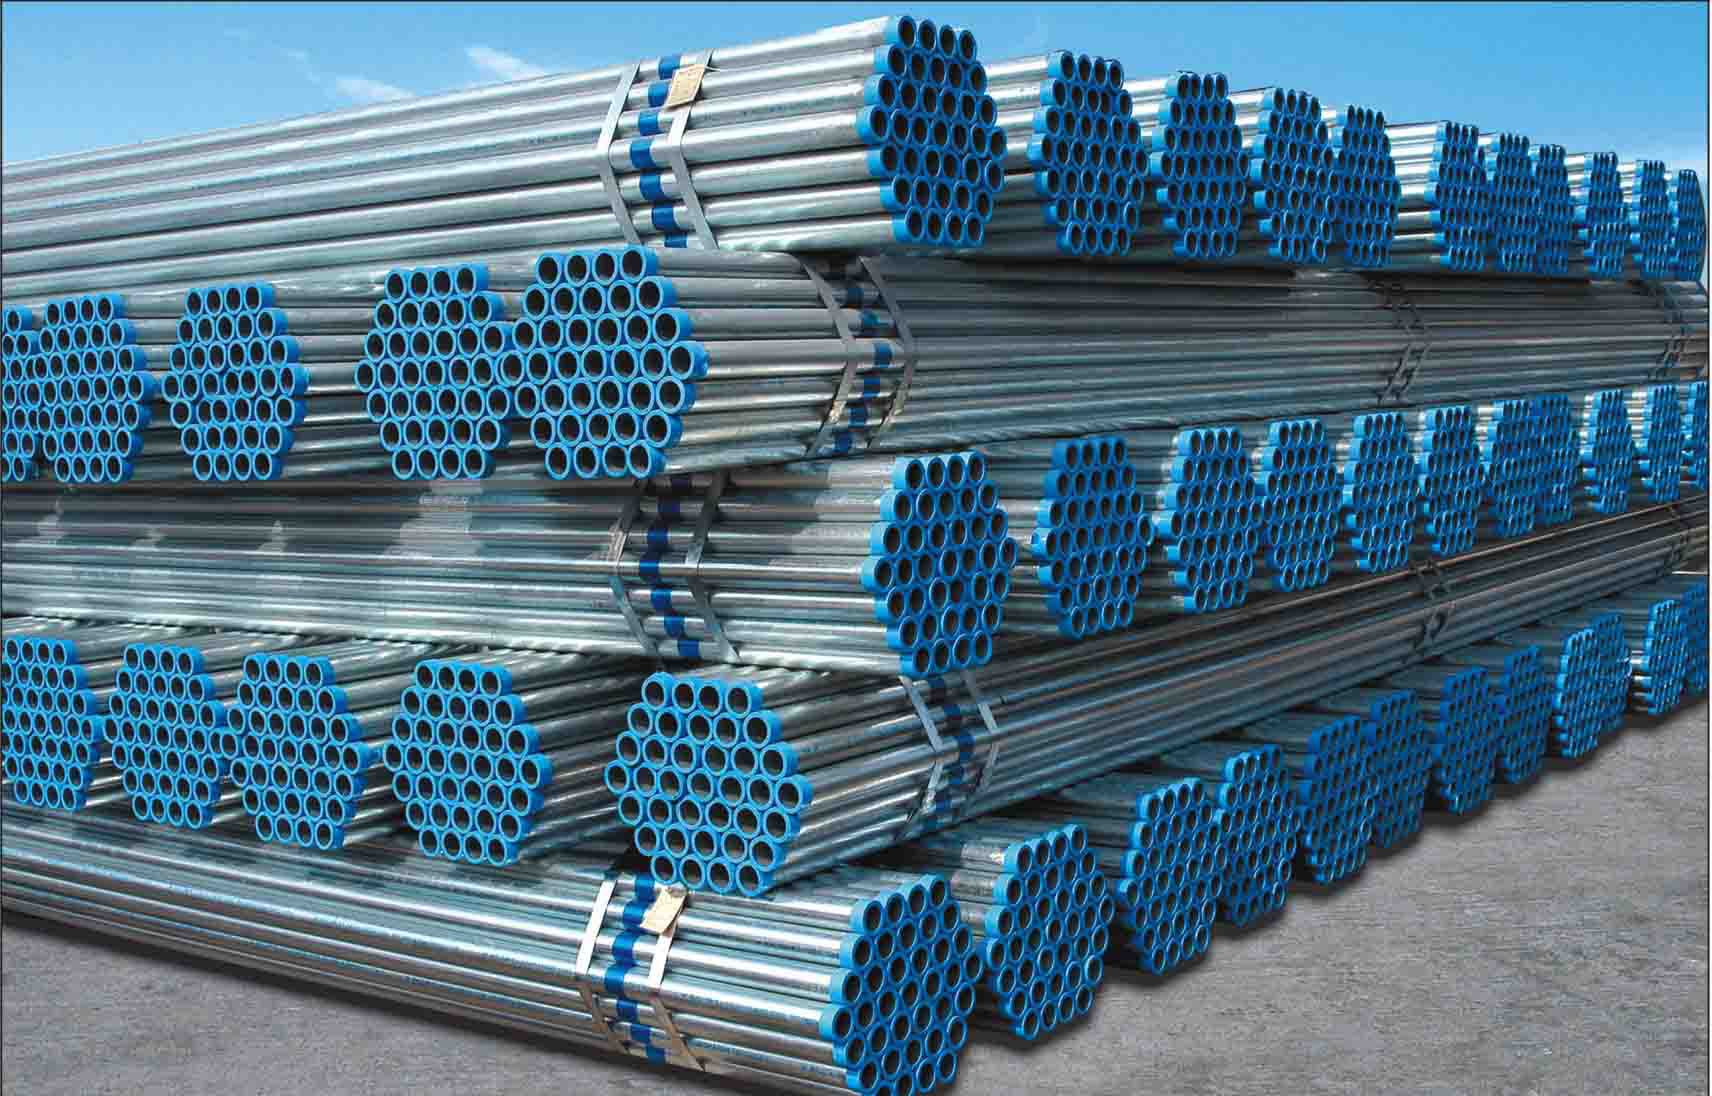 Features of Galvanized Steel Pipe